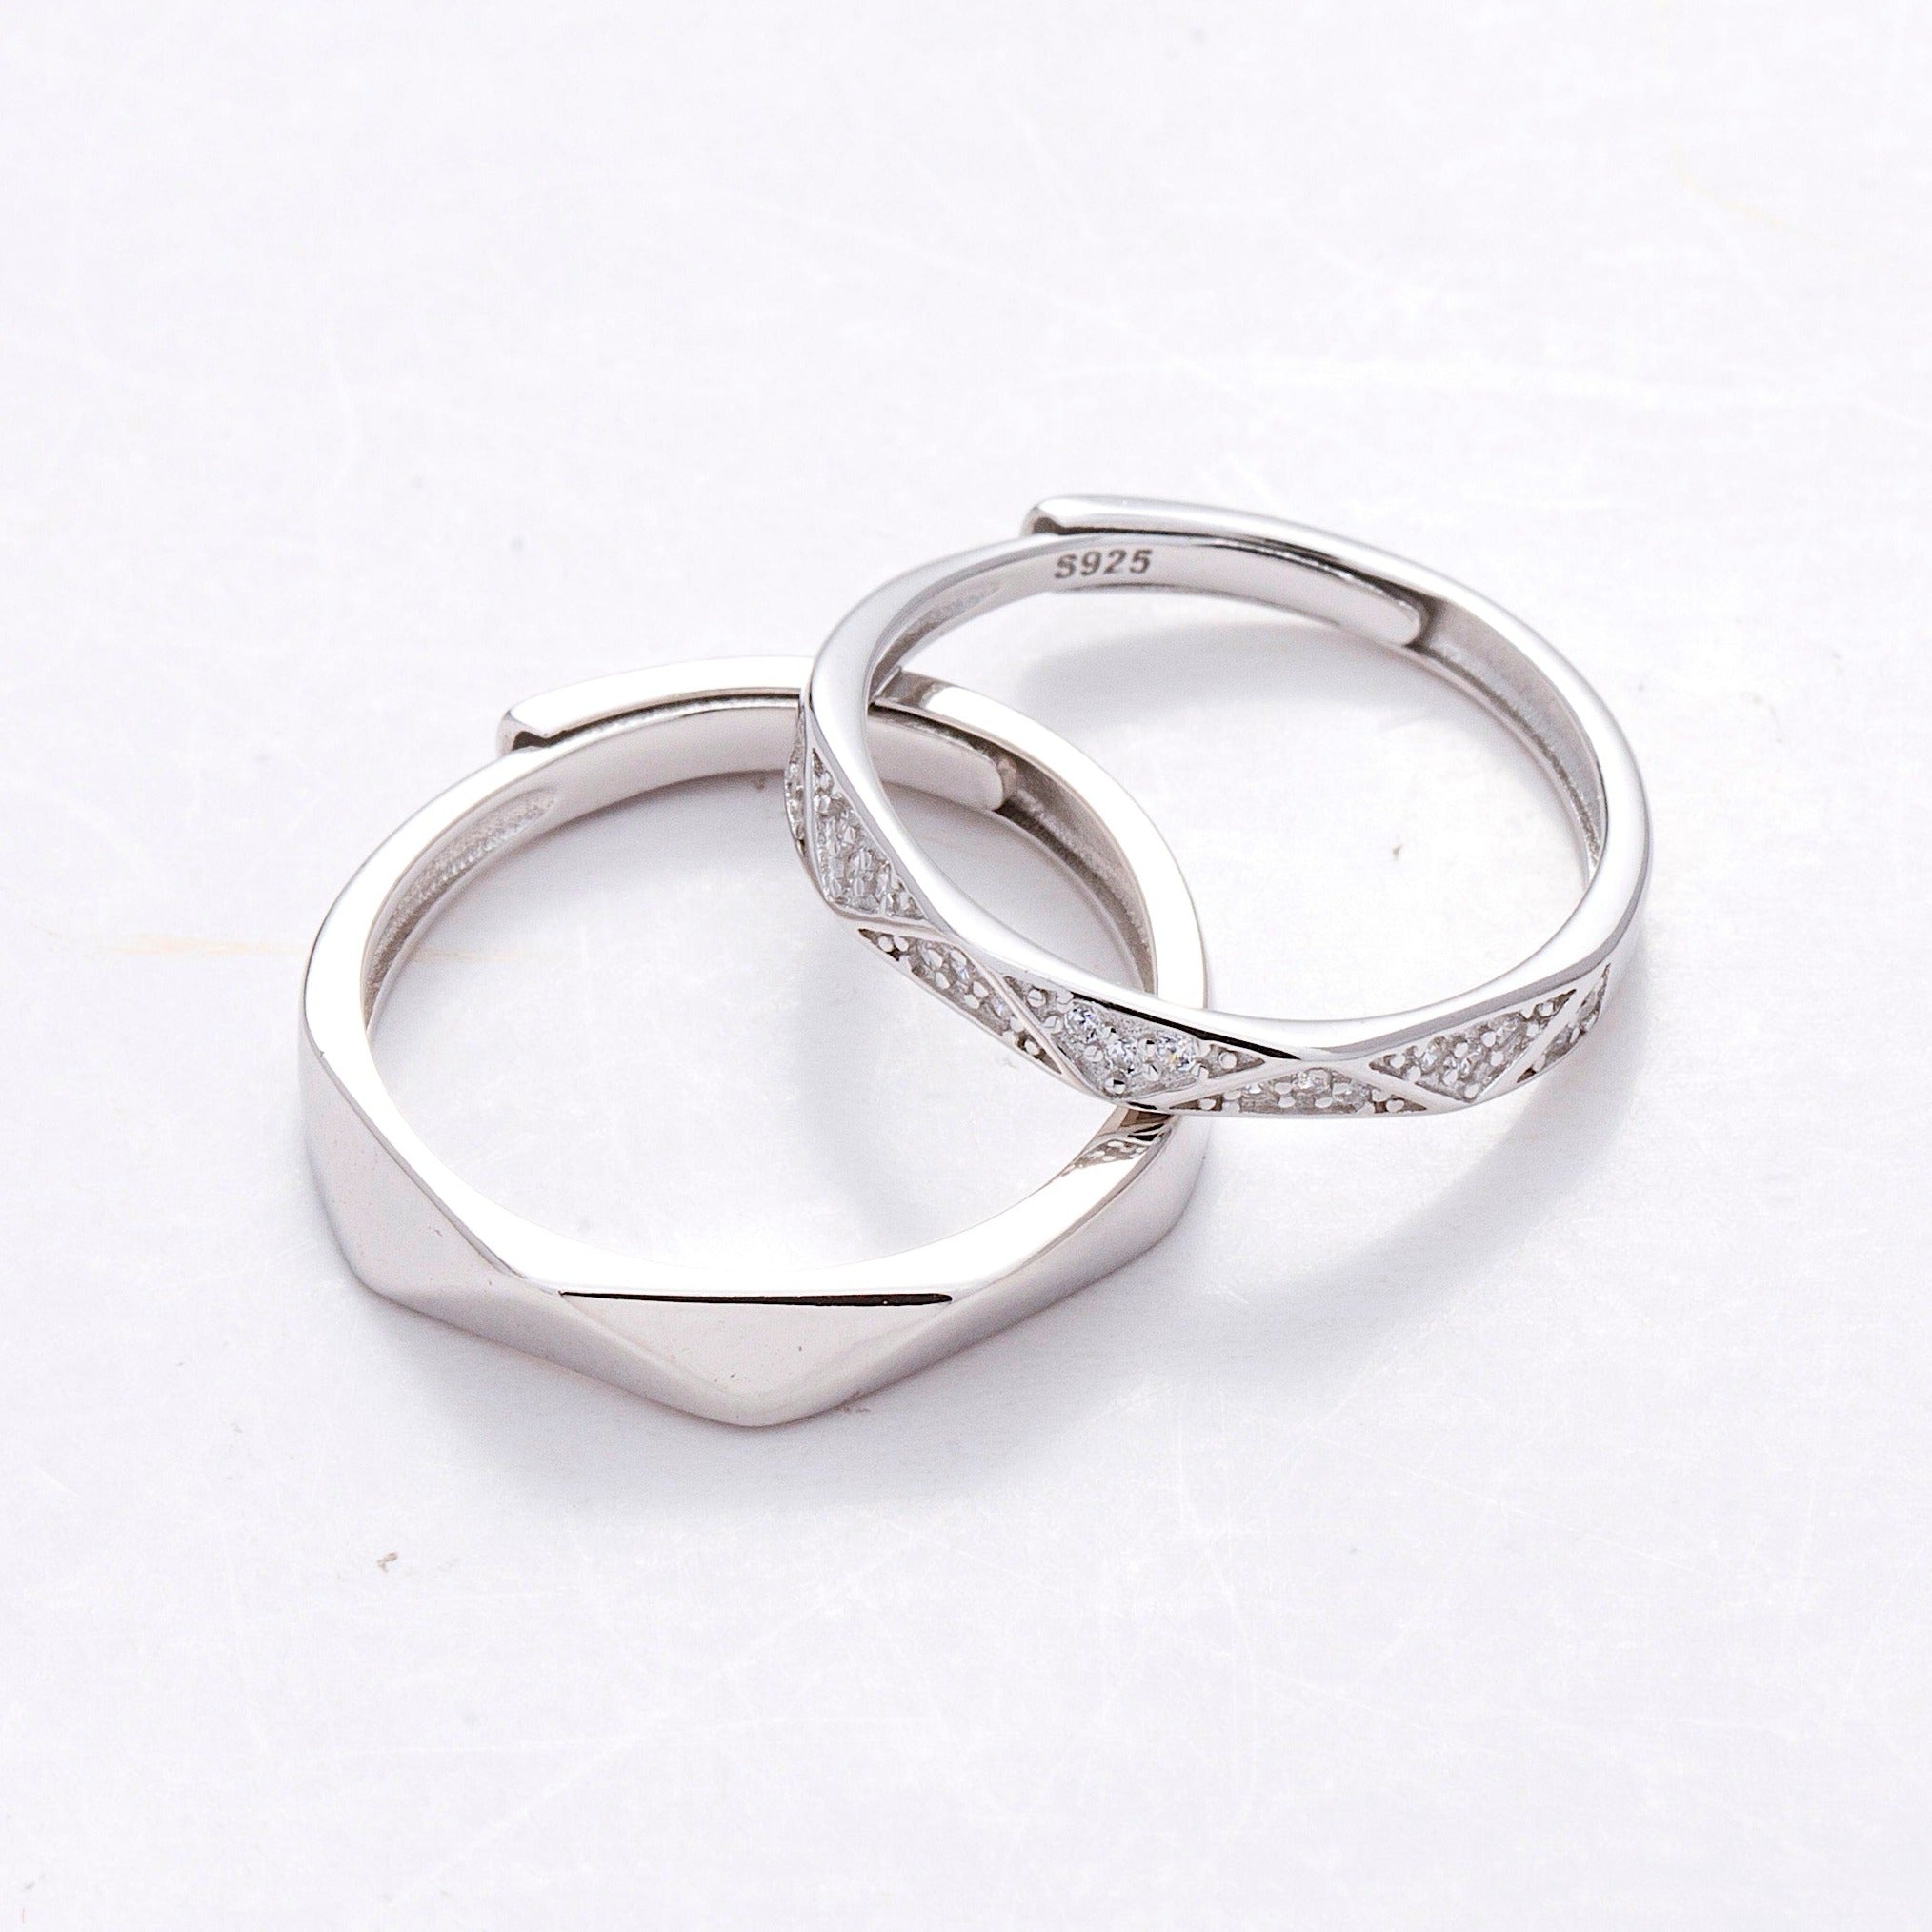 Nilu's Collection 925 Sterling Silver Couple Ring | Simple, Stylish Va